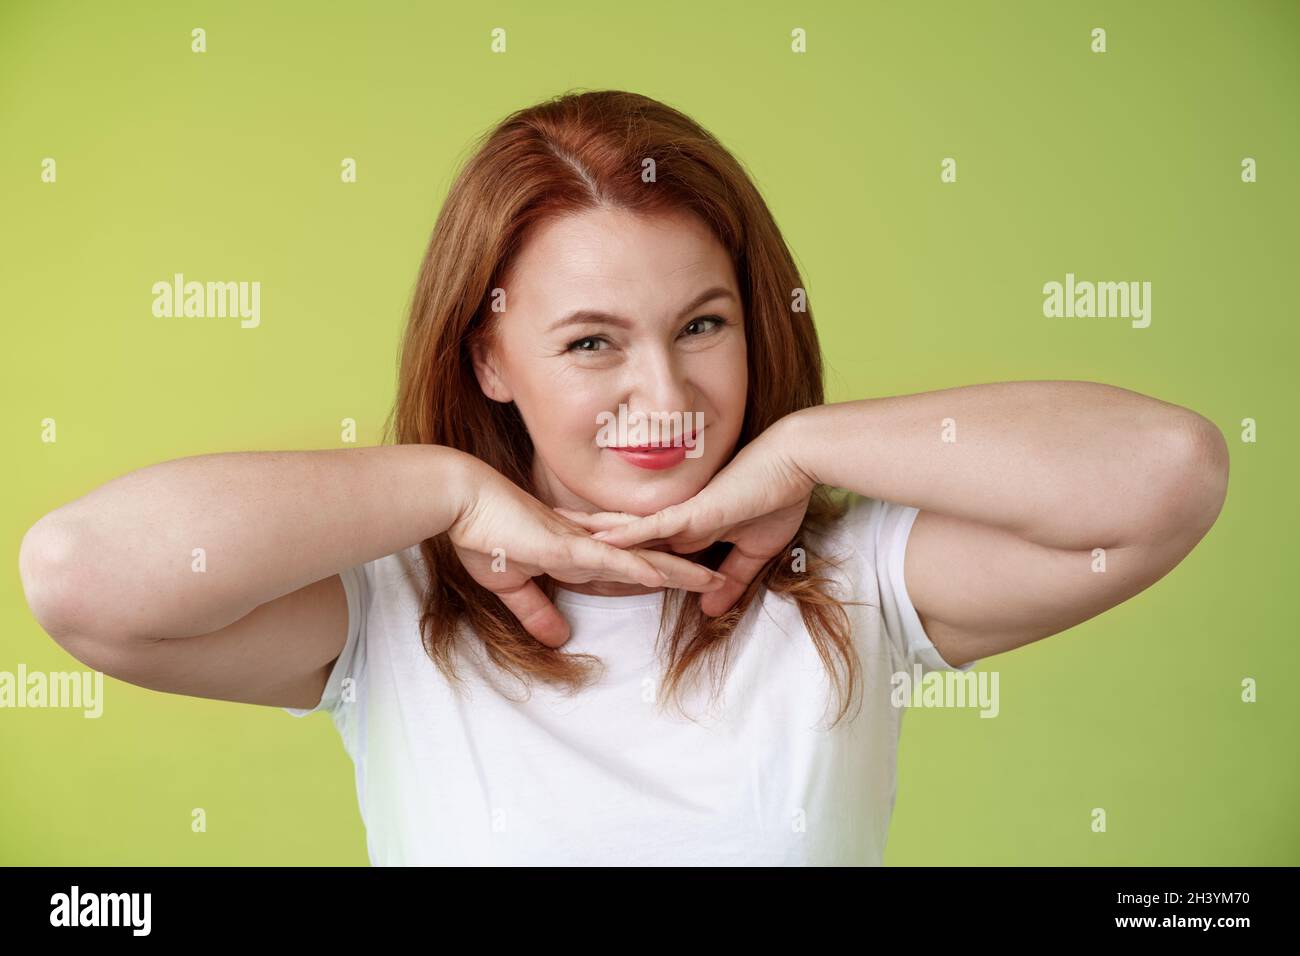 Aging, cosmetology, wellbeing concept. Happy self-assured redhead woman hold hands under jawline smiling showing facial blemishe Stock Photo